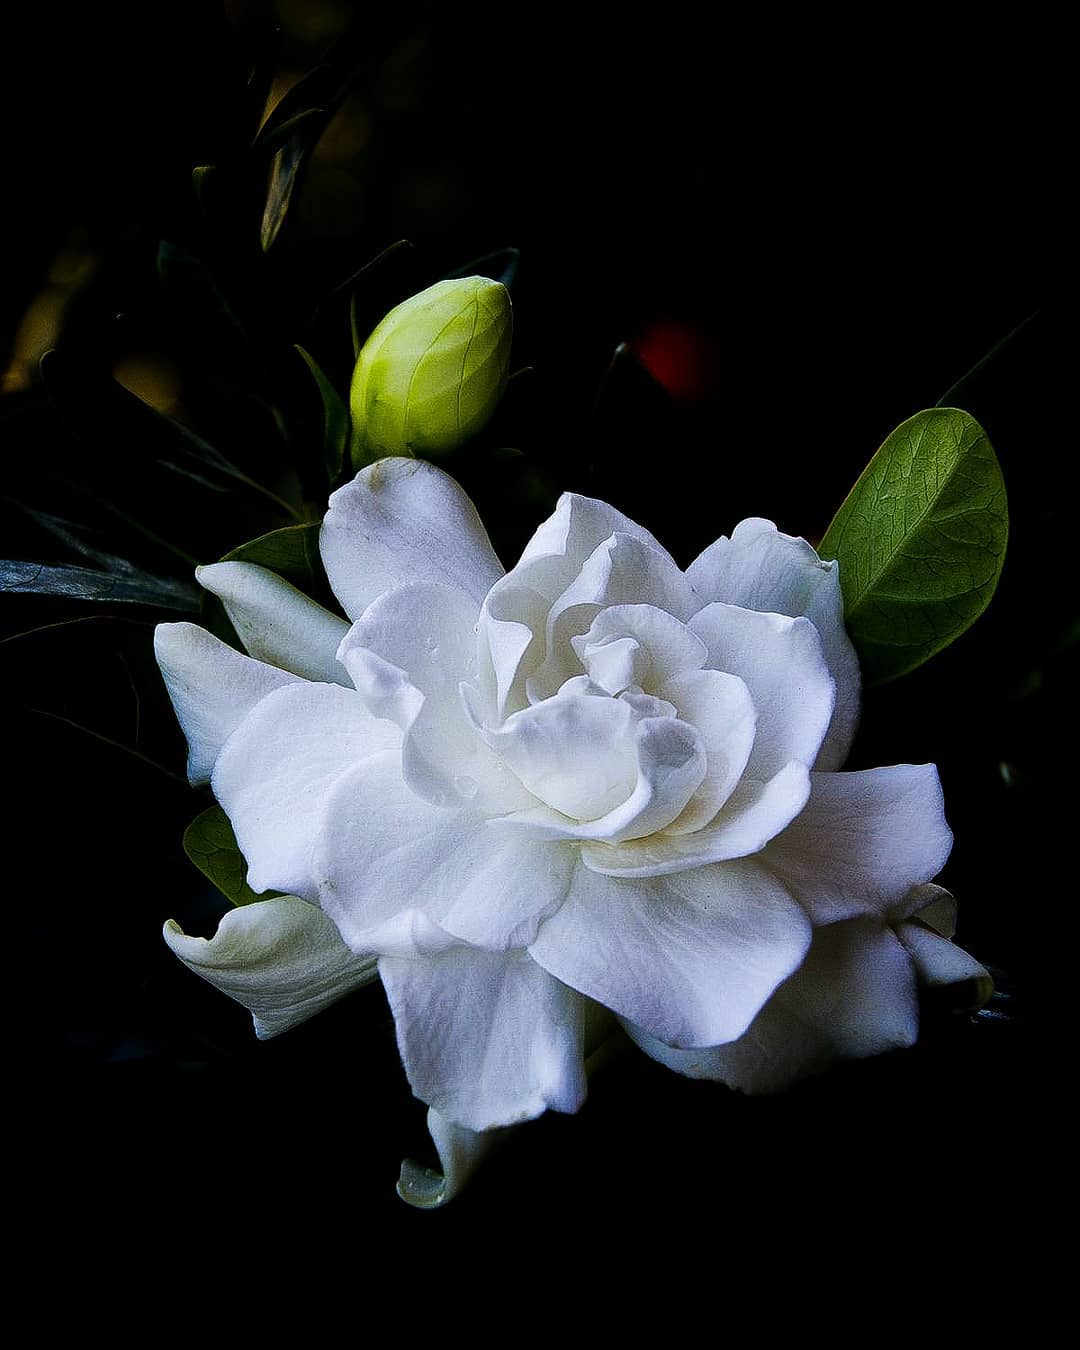 Gardenia Flower Meaning Find Out What This Flower Symbolizes